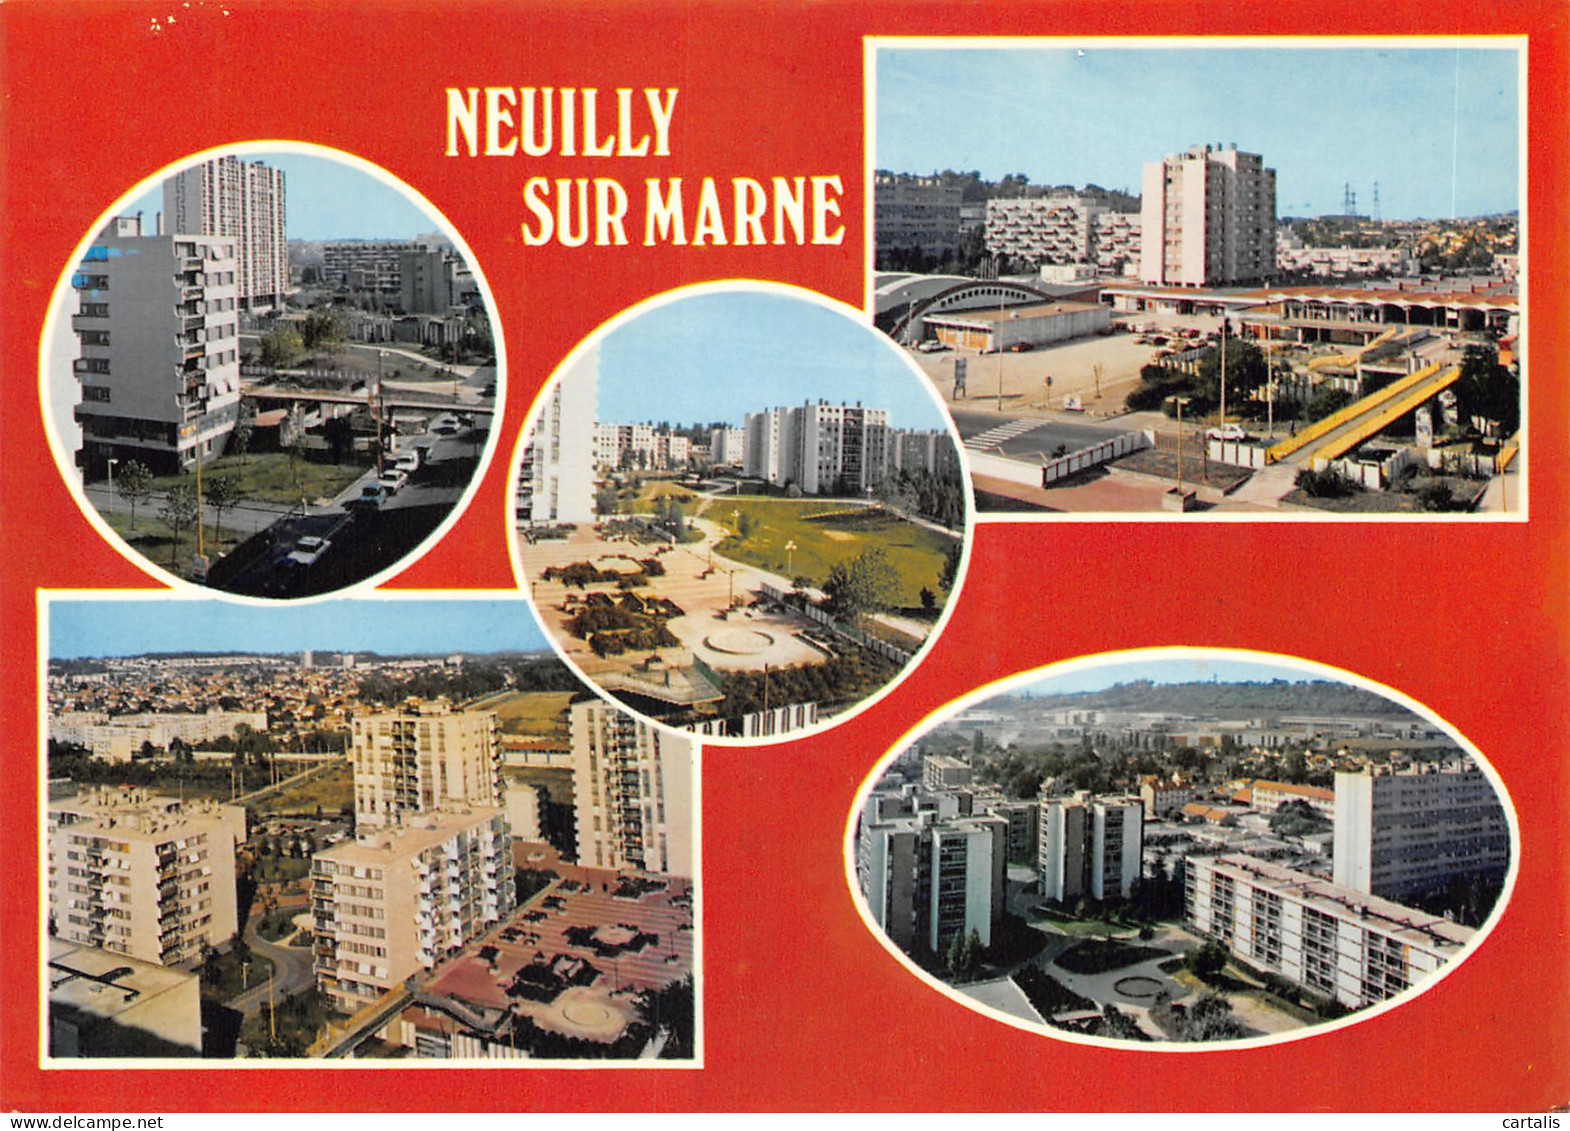 93-NEUILLY SUR MARNE-N 595-A/0373 - Neuilly Sur Marne